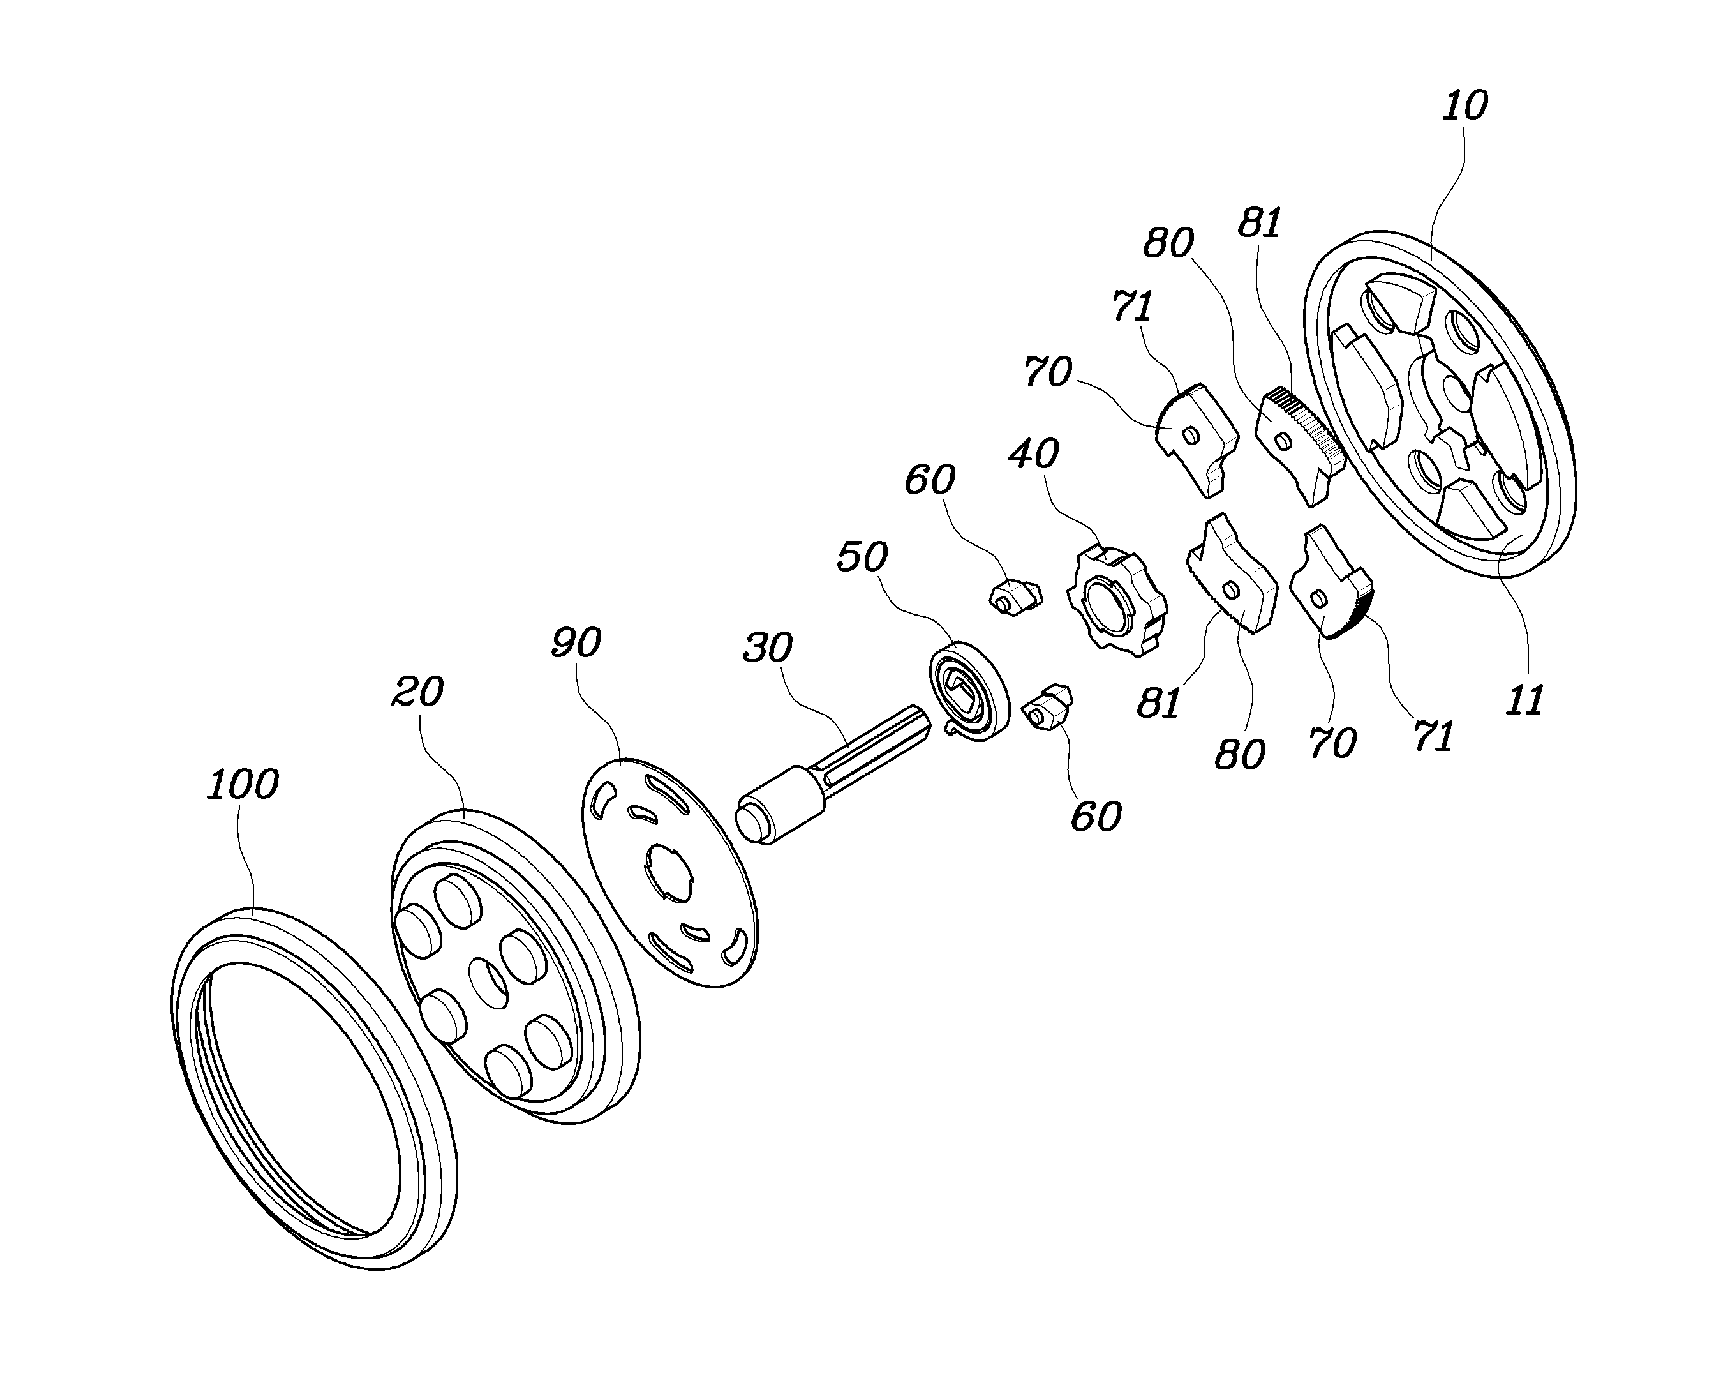 Reclining apparatus for vehicle seat